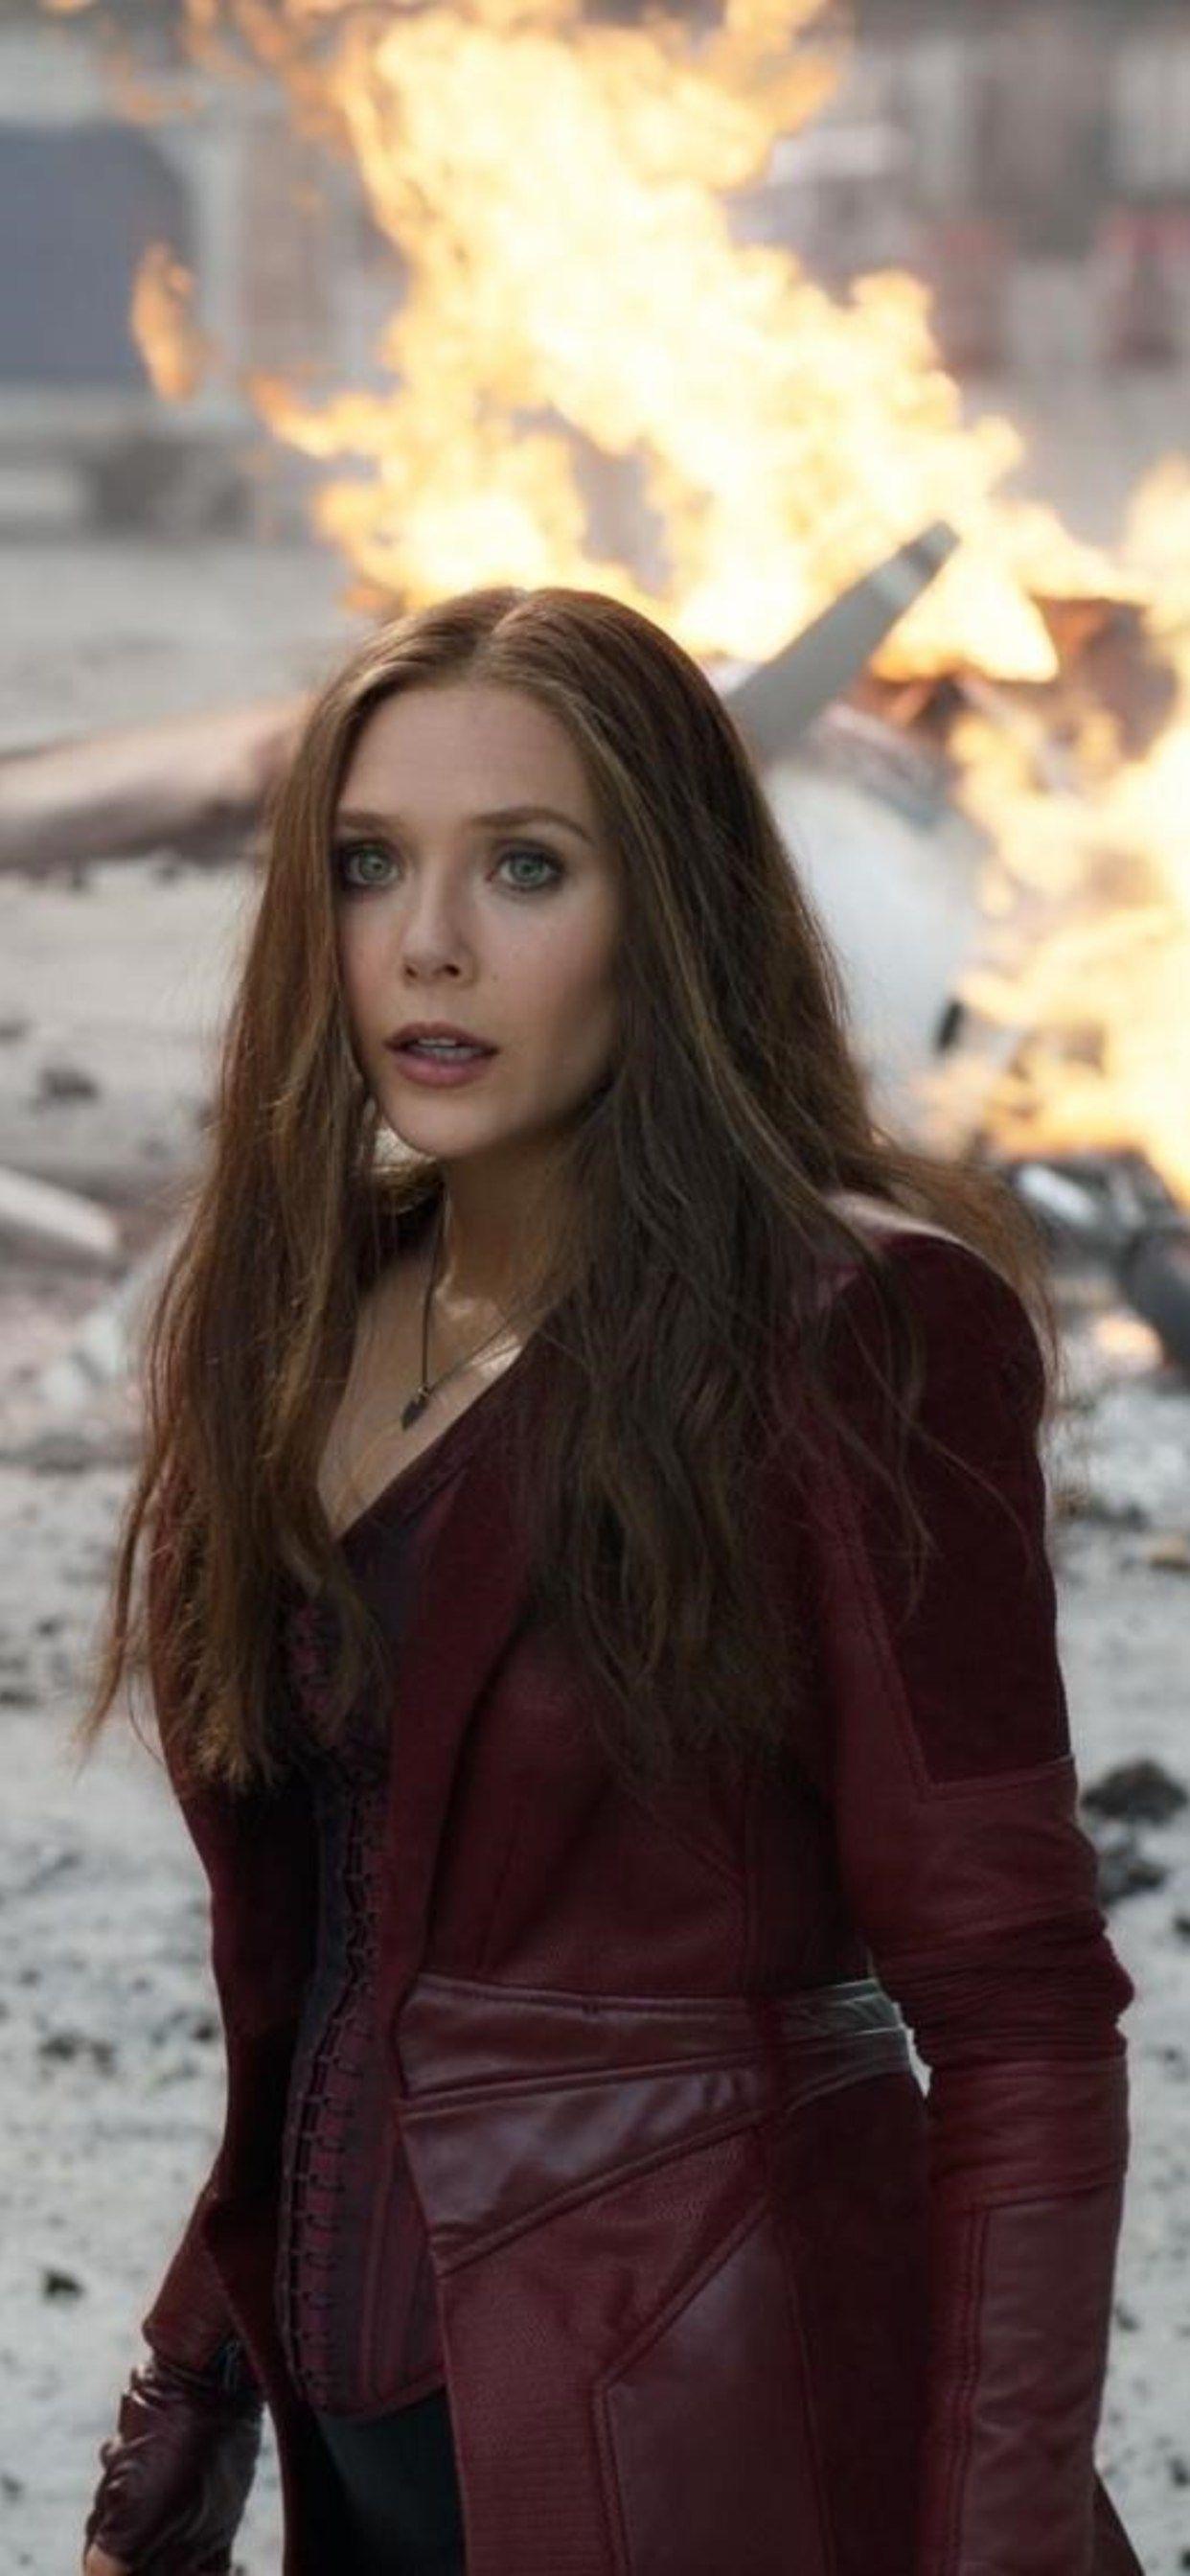 Most downloaded Wanda Maximoff wallpapers Wanda Maximoff for iPhone  desktop tablet devices and also for samsung and Xiaomi mobile phones   Page 1